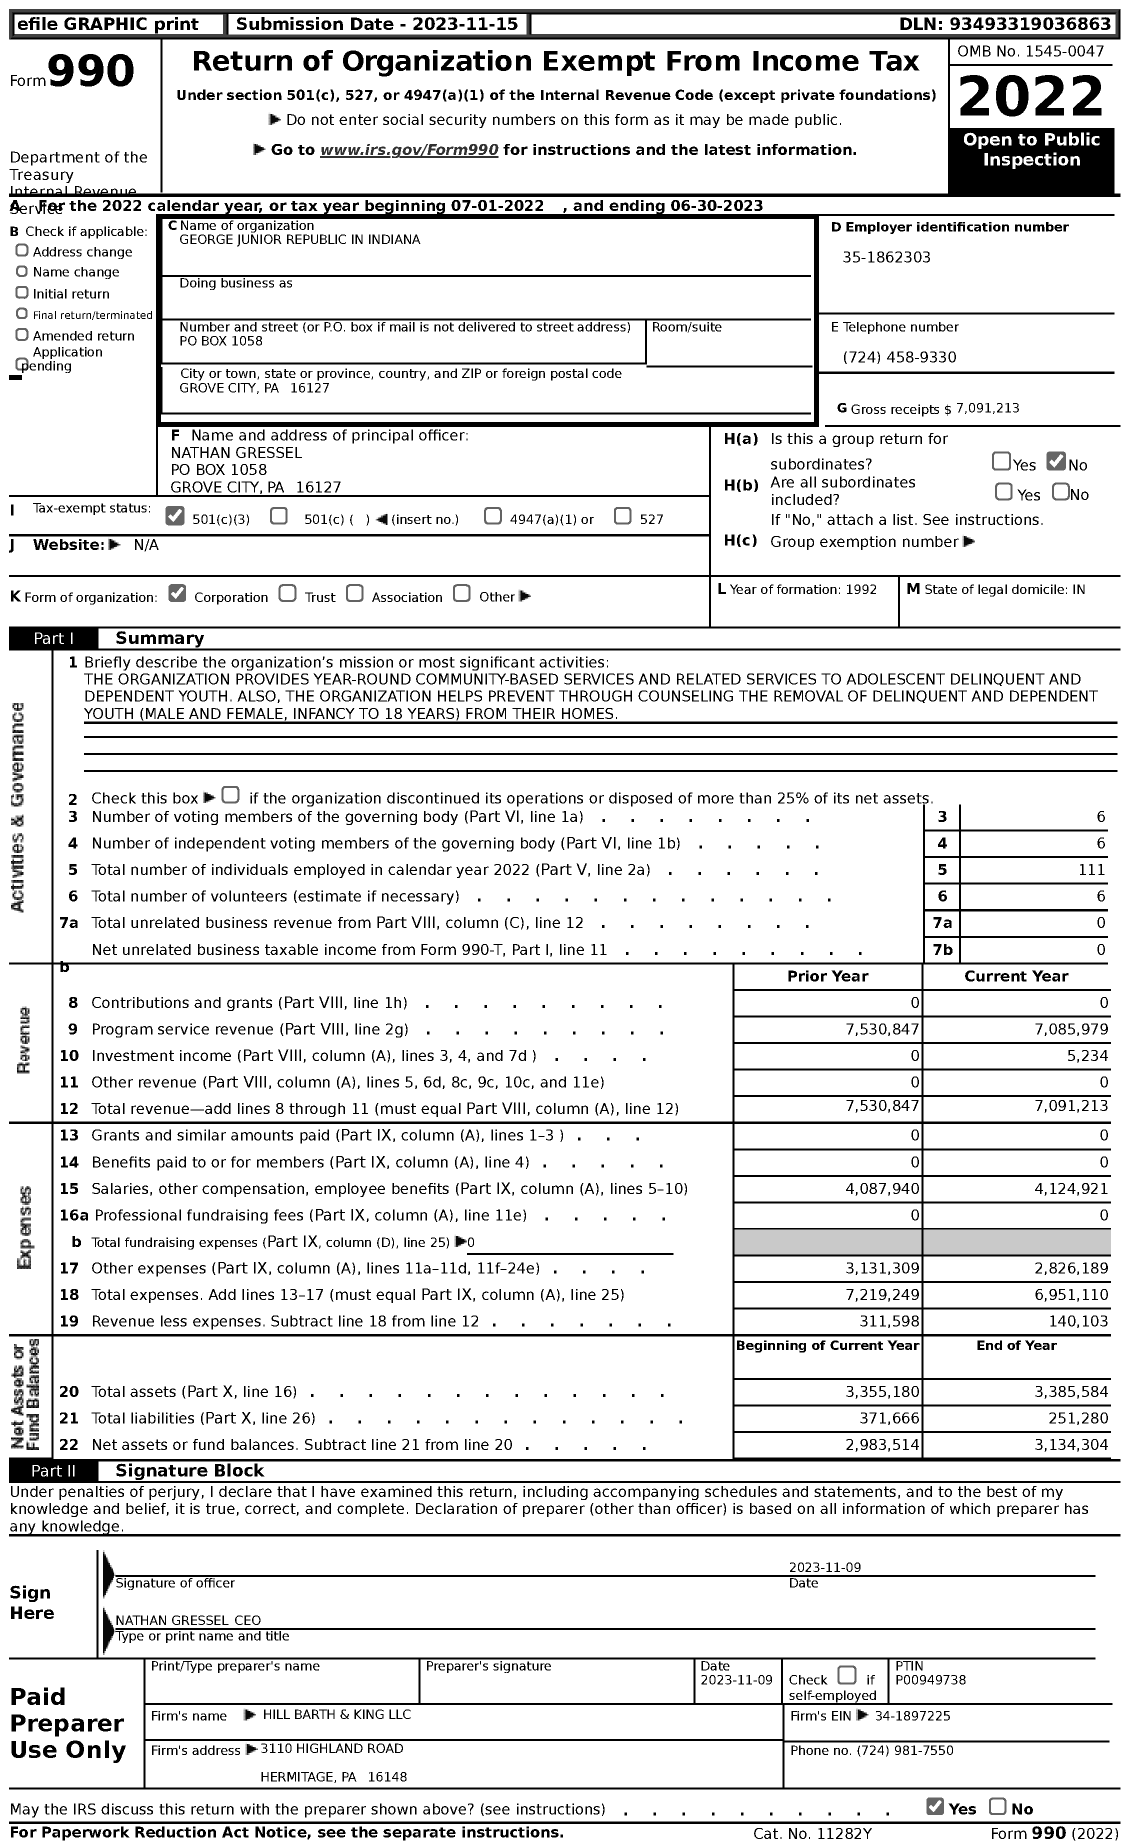 Image of first page of 2022 Form 990 for George Junior Republic in Indiana (GJR)